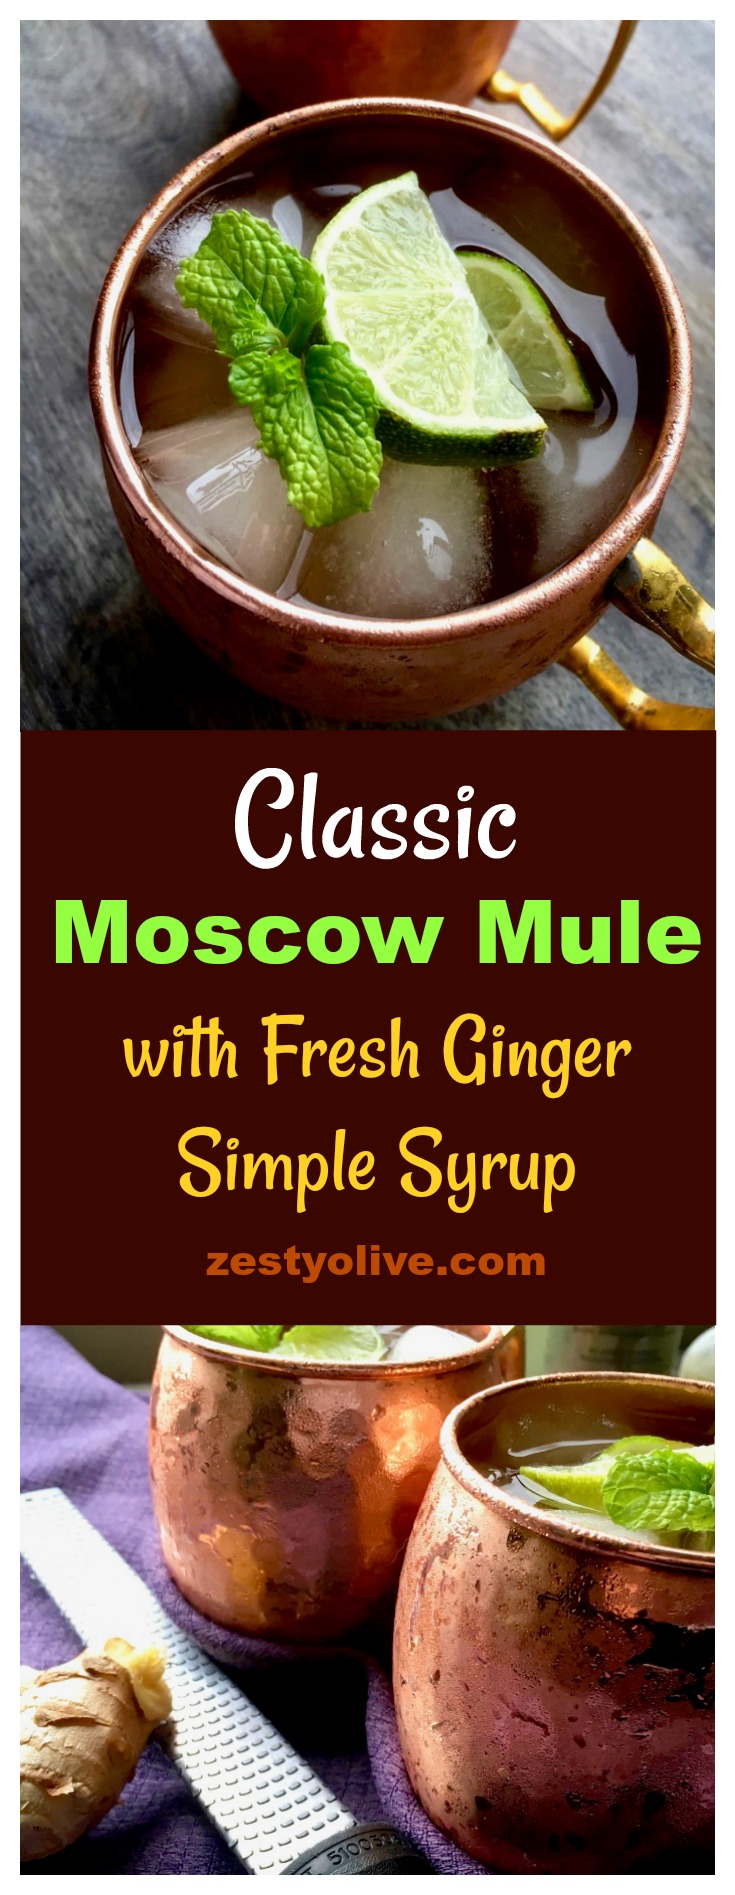 Although Moscow Mules are meant to be enjoyed ice cold, there is something inherently comforting about the warm, spicy notes of ginger found in this classic cocktail.